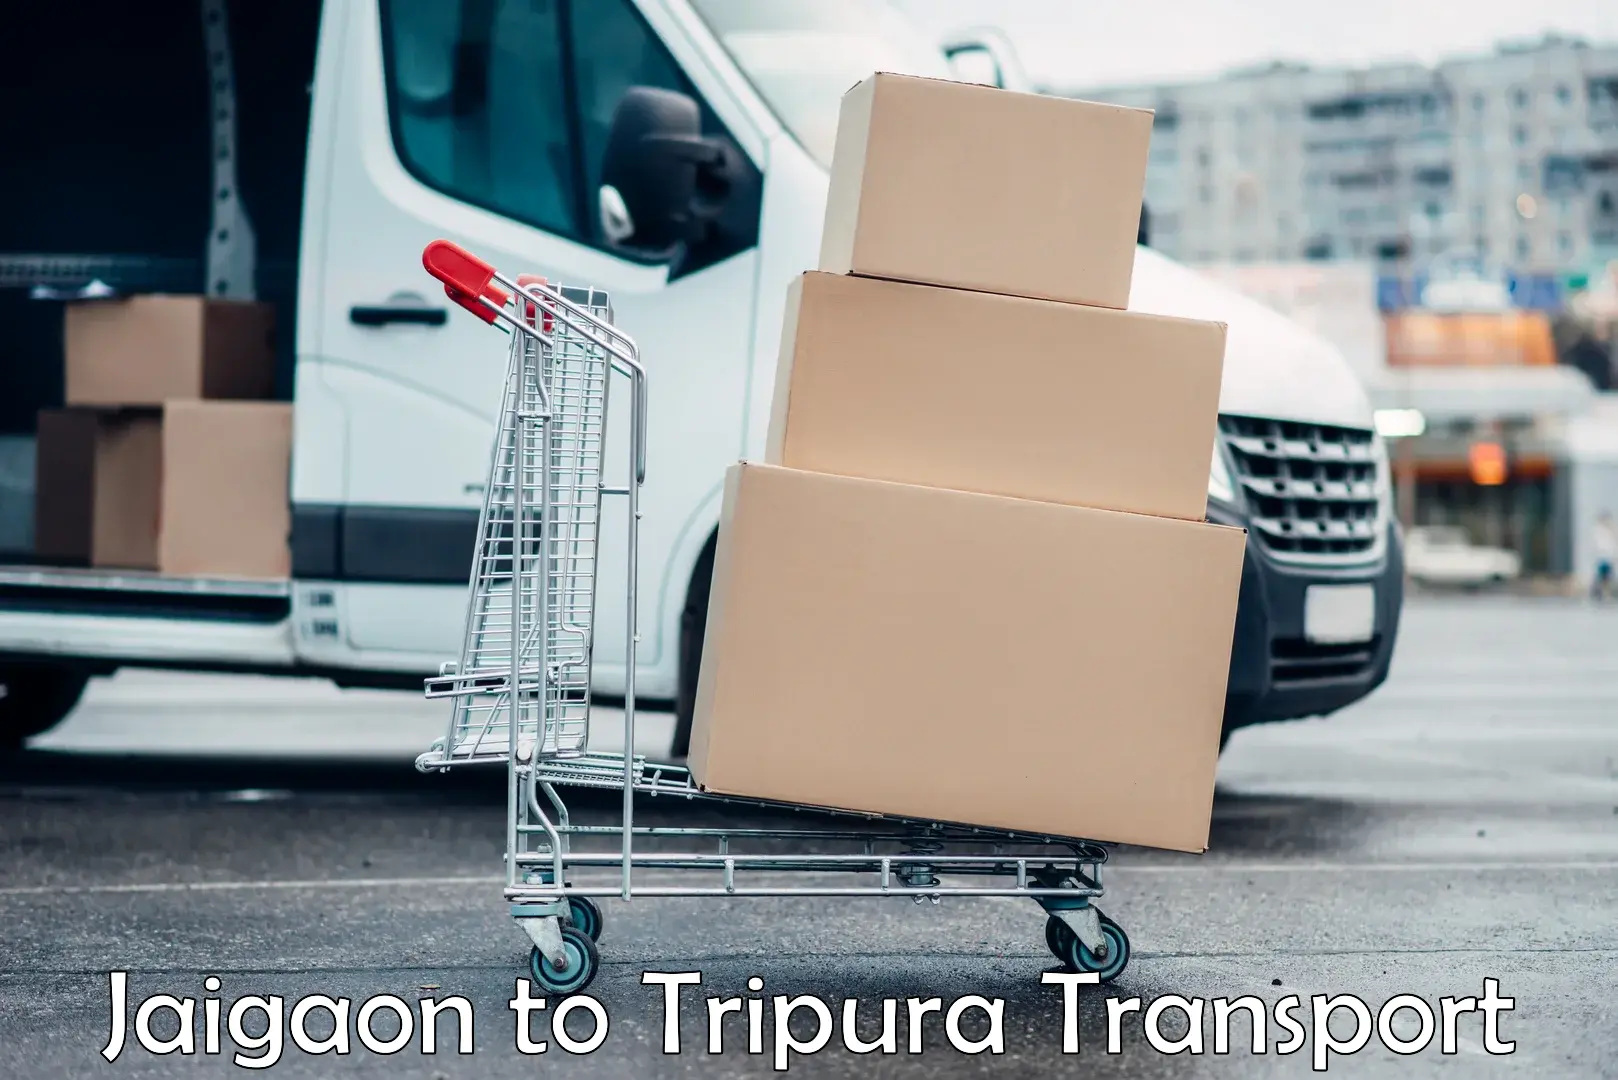 Vehicle transport services in Jaigaon to Tripura